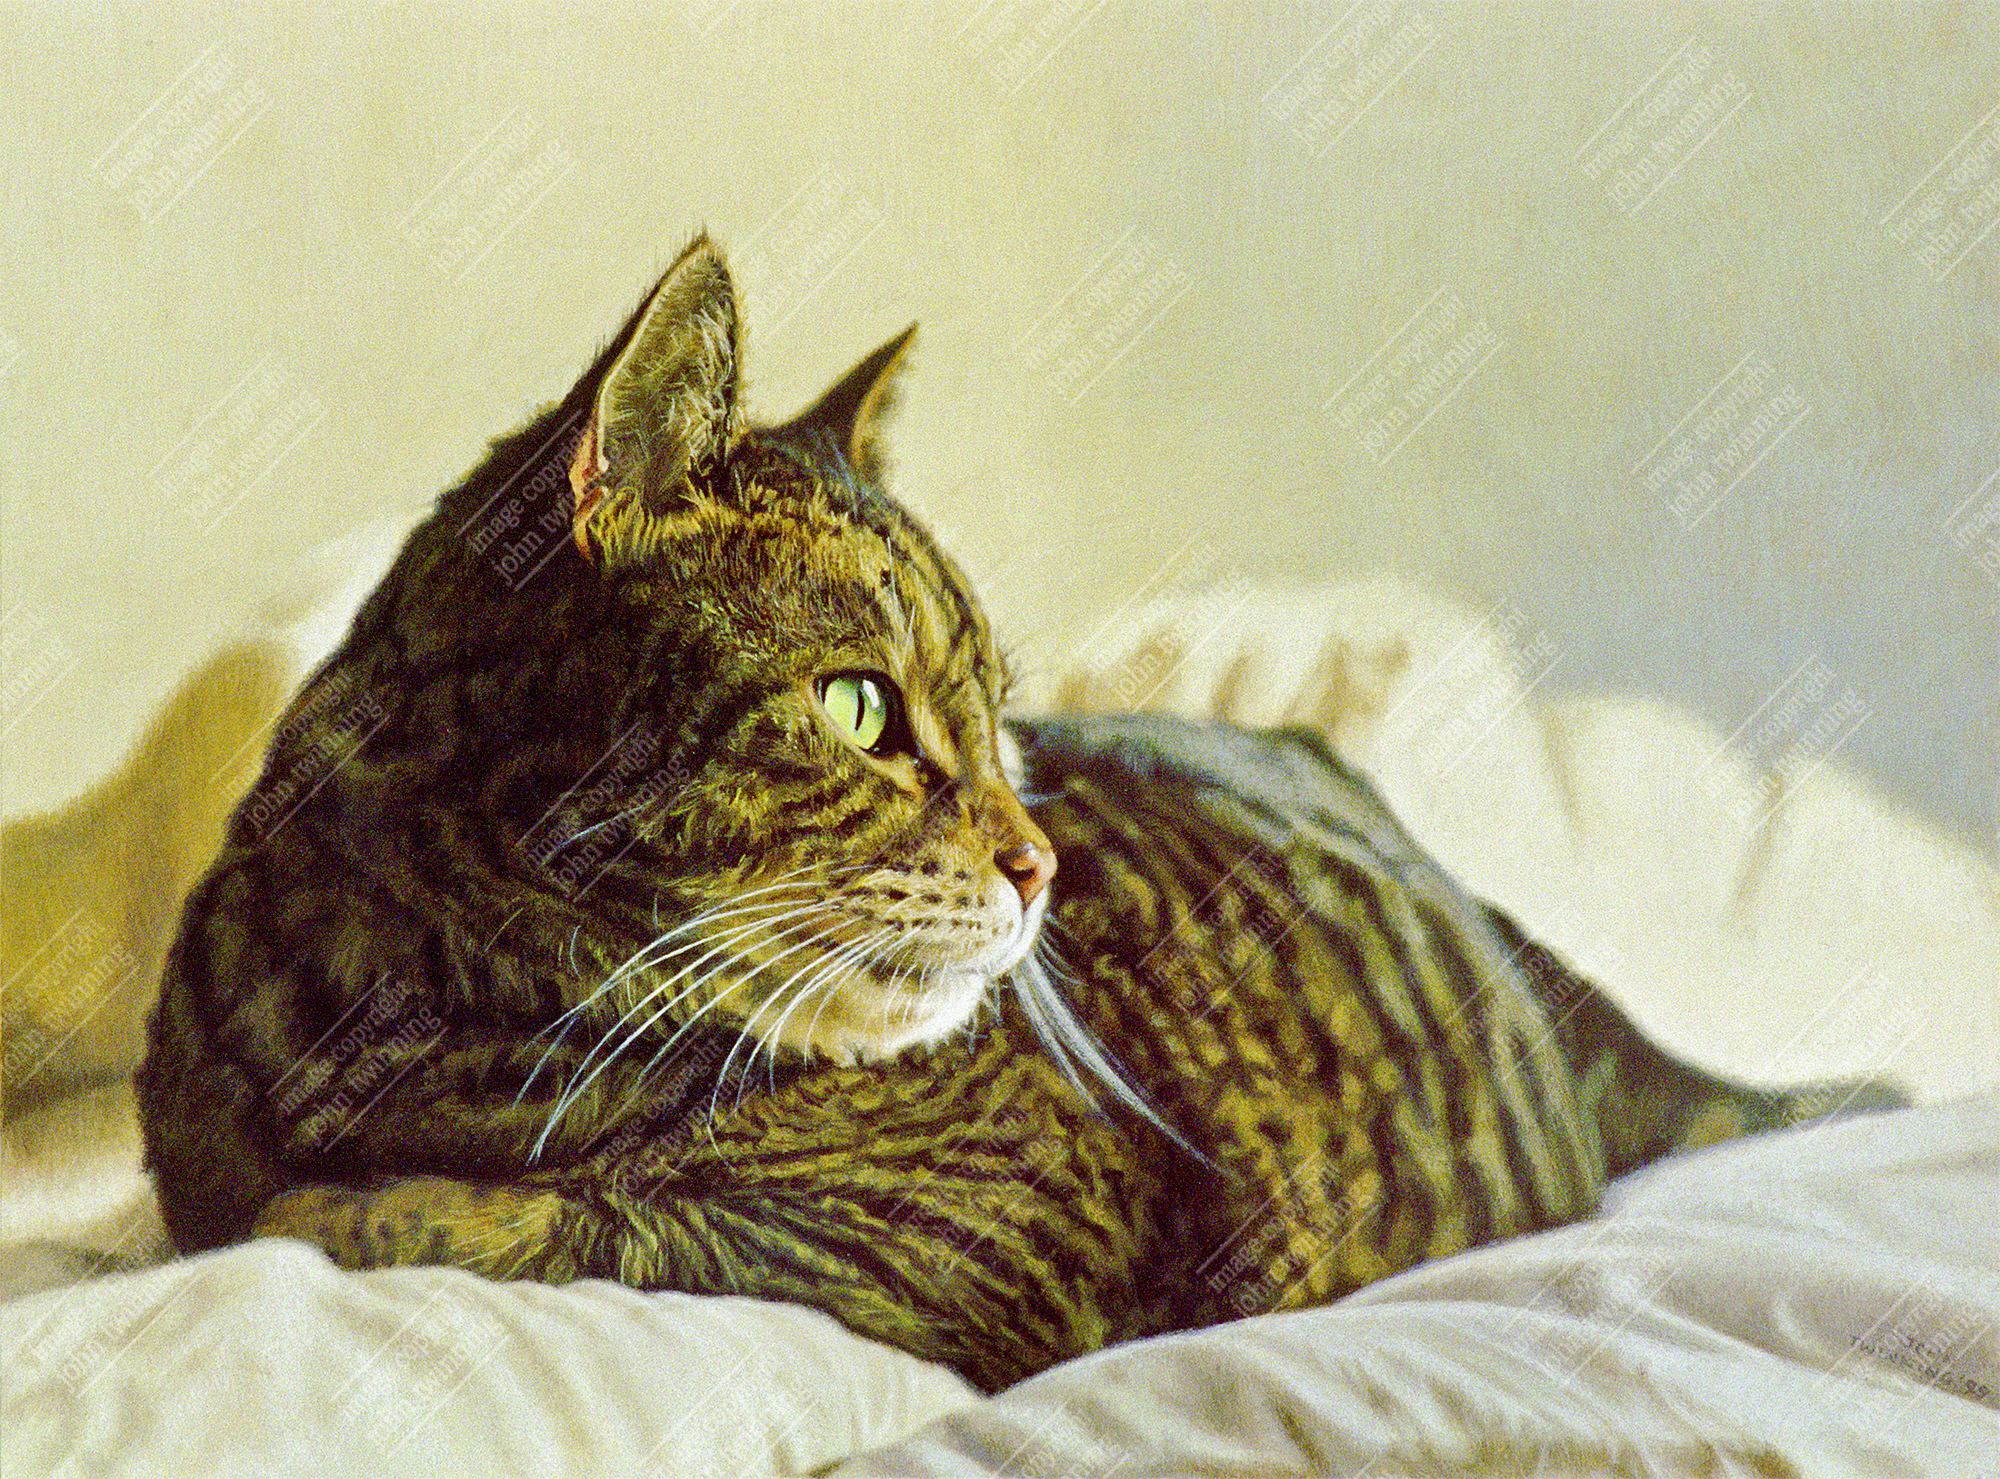 ‘Tabatha Study I’ – art print from a pet portrait watercolour painting of a tabby cat